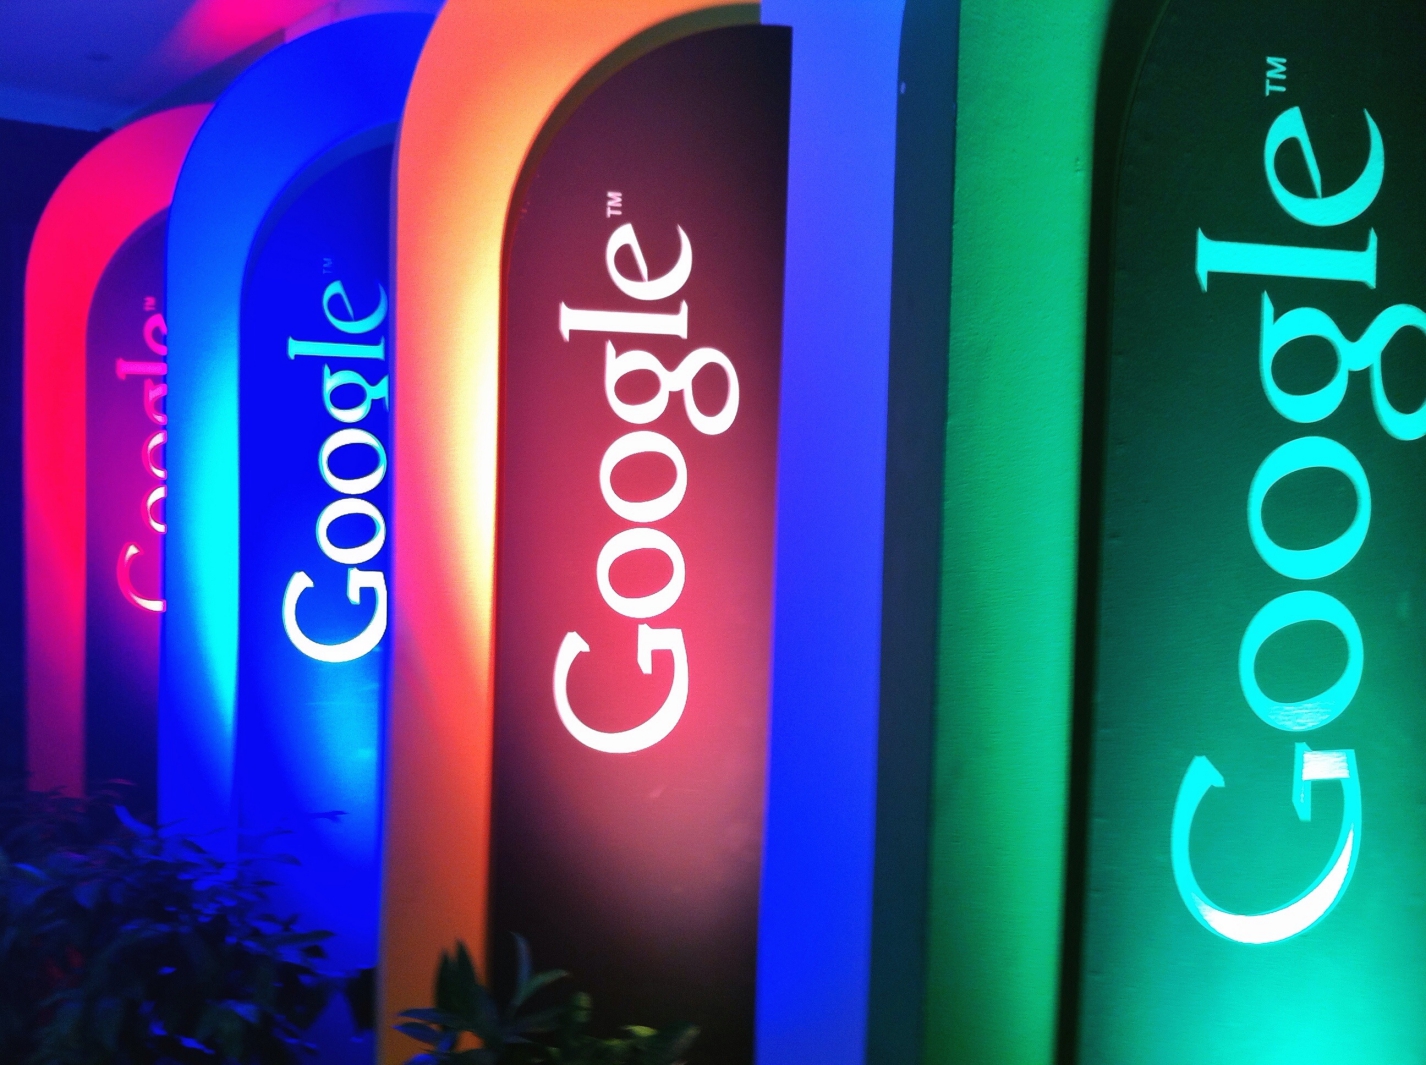 Google expands its public Wi-Fi program for emerging markets to Indonesia